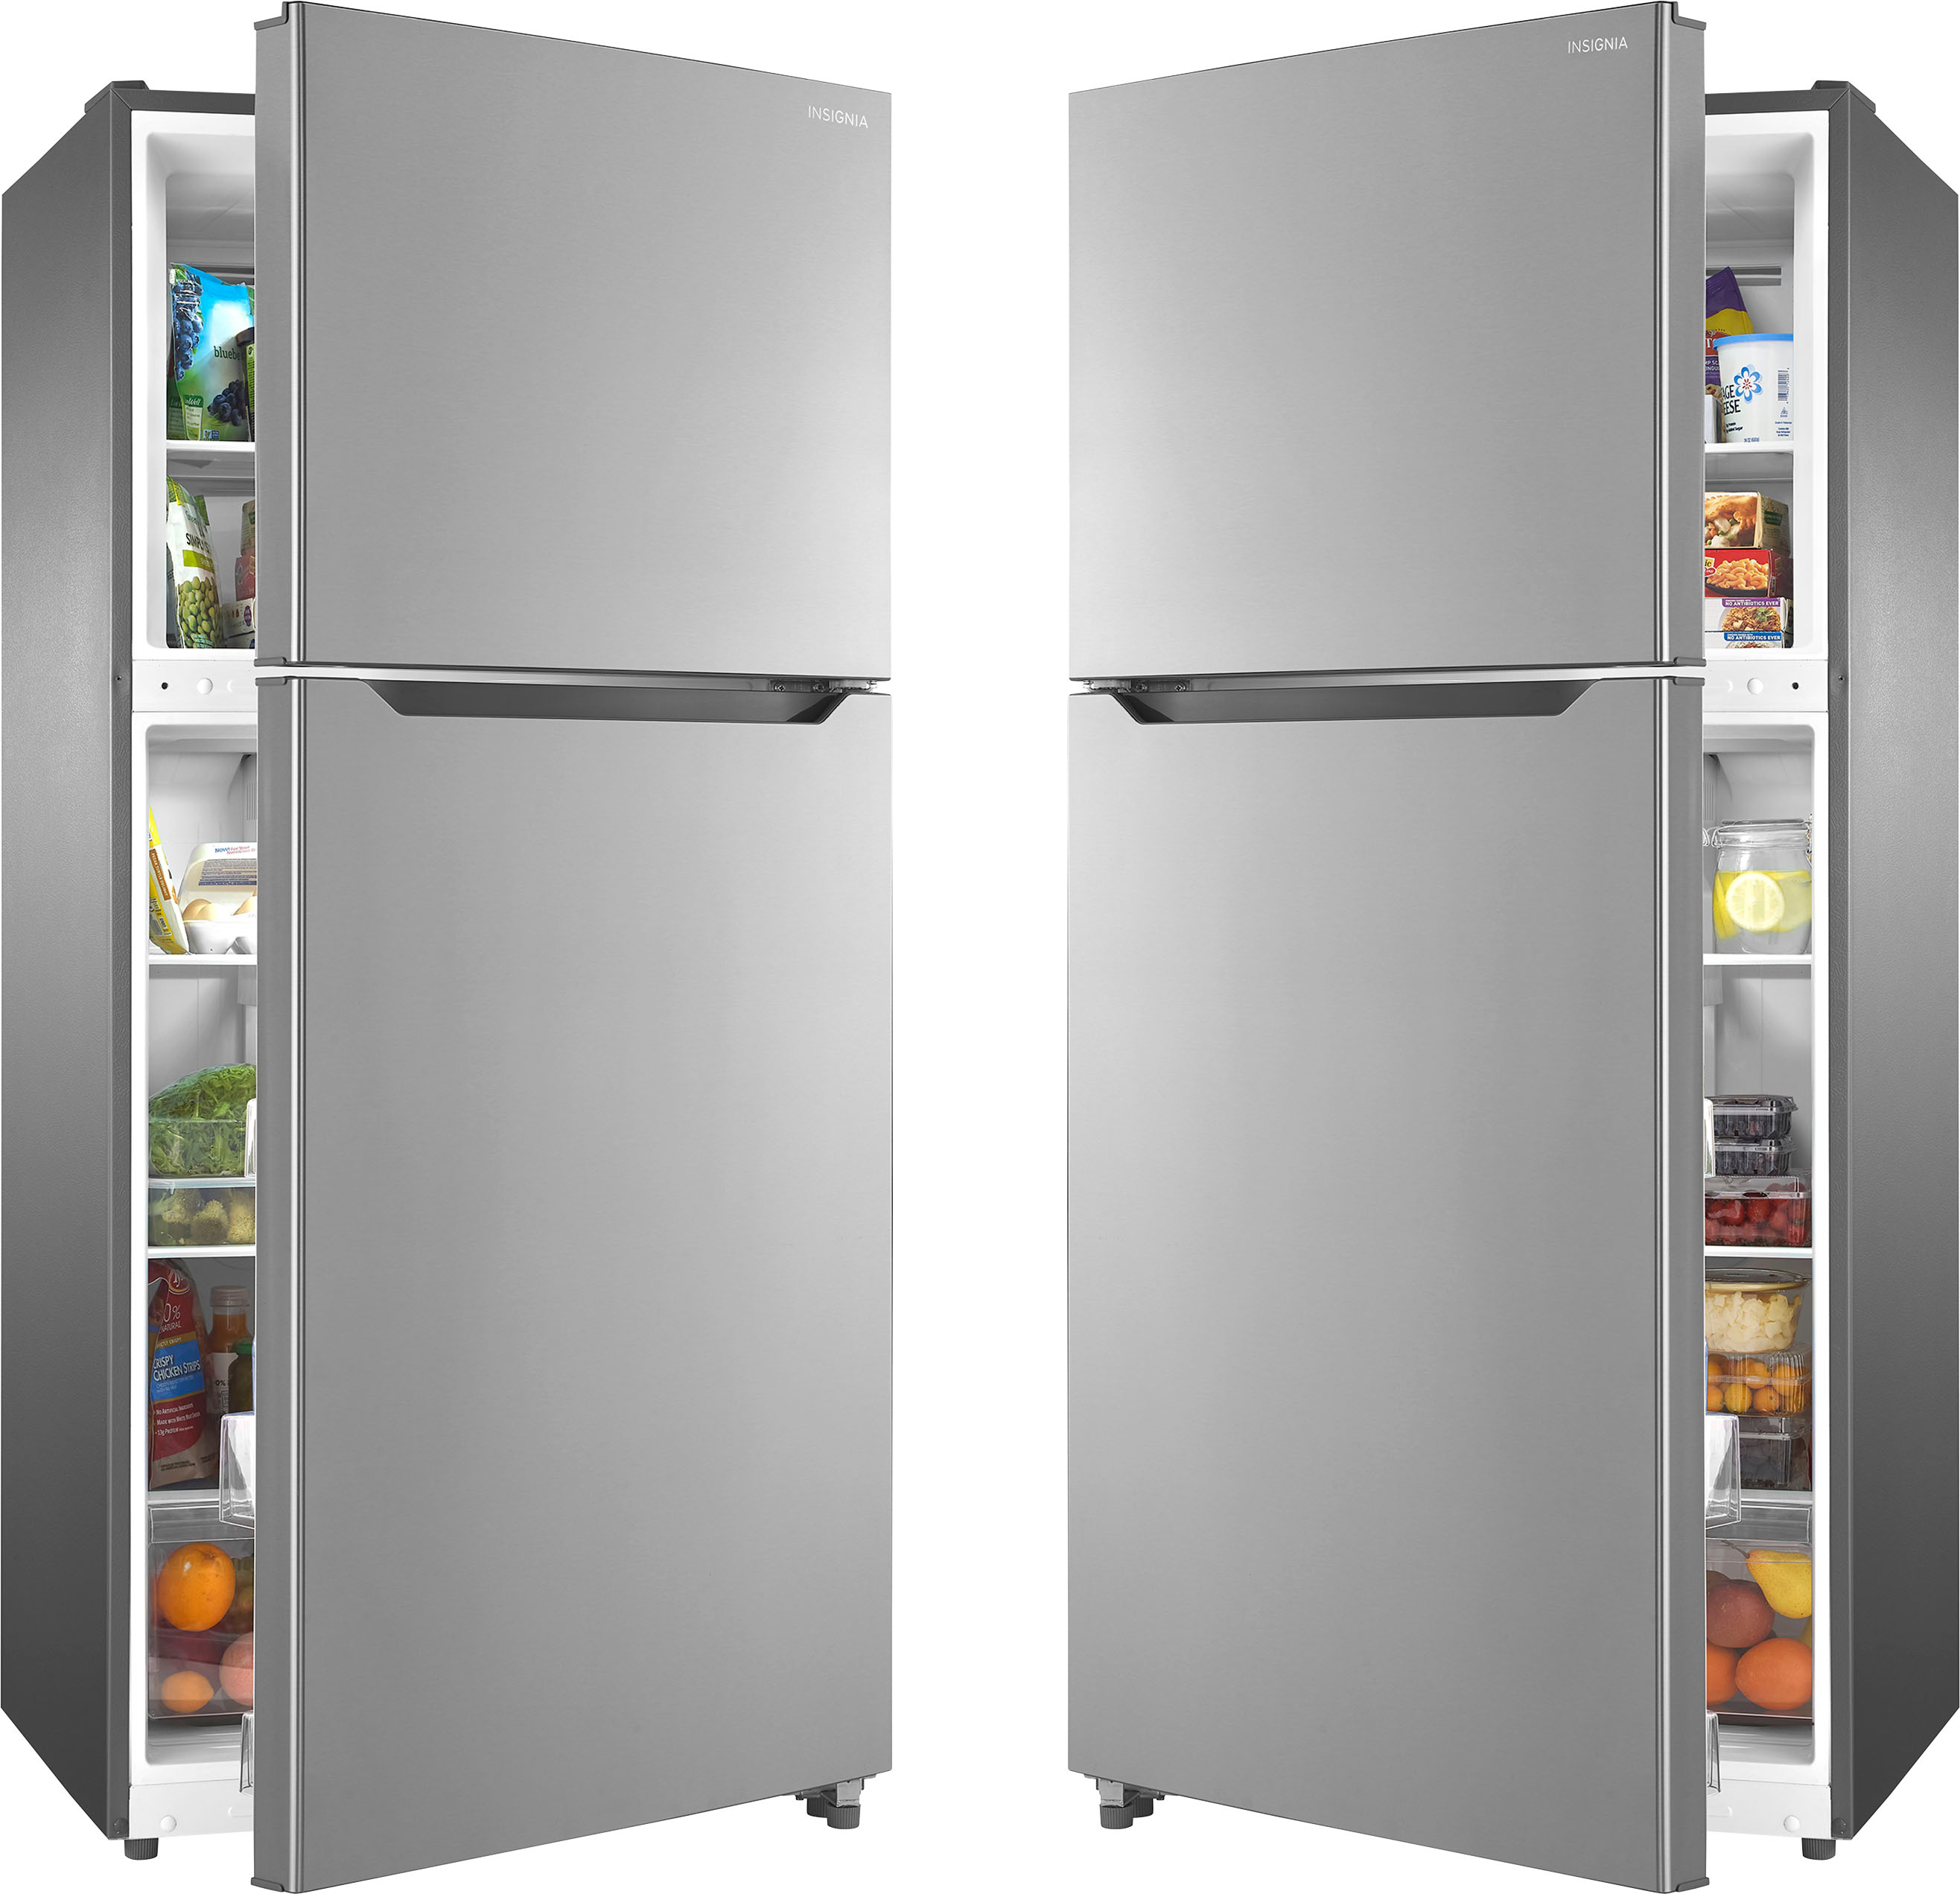 Insignia™ 4.8 Cu. Ft. Freestanding Electric Convection Range with Steam  Cleaning Stainless Steel NS-RGFESS2 - Best Buy